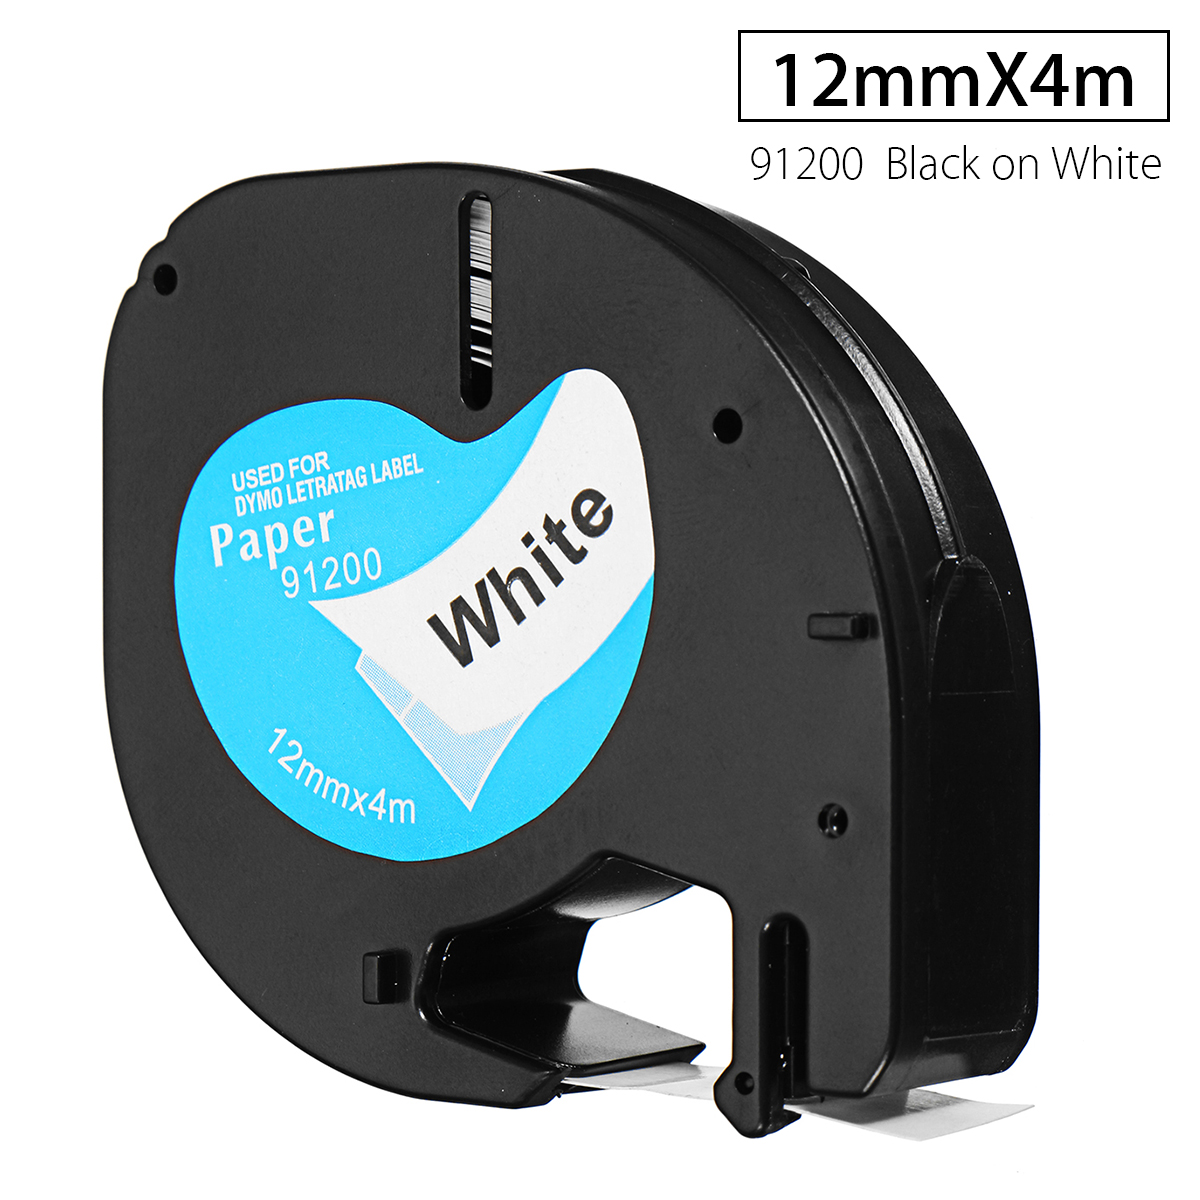 12mmx4m-Portable-Plastic-Label-Tape-Compatible-For-DYMO-LetraTAG-91200-Black-on-White-1559362-1